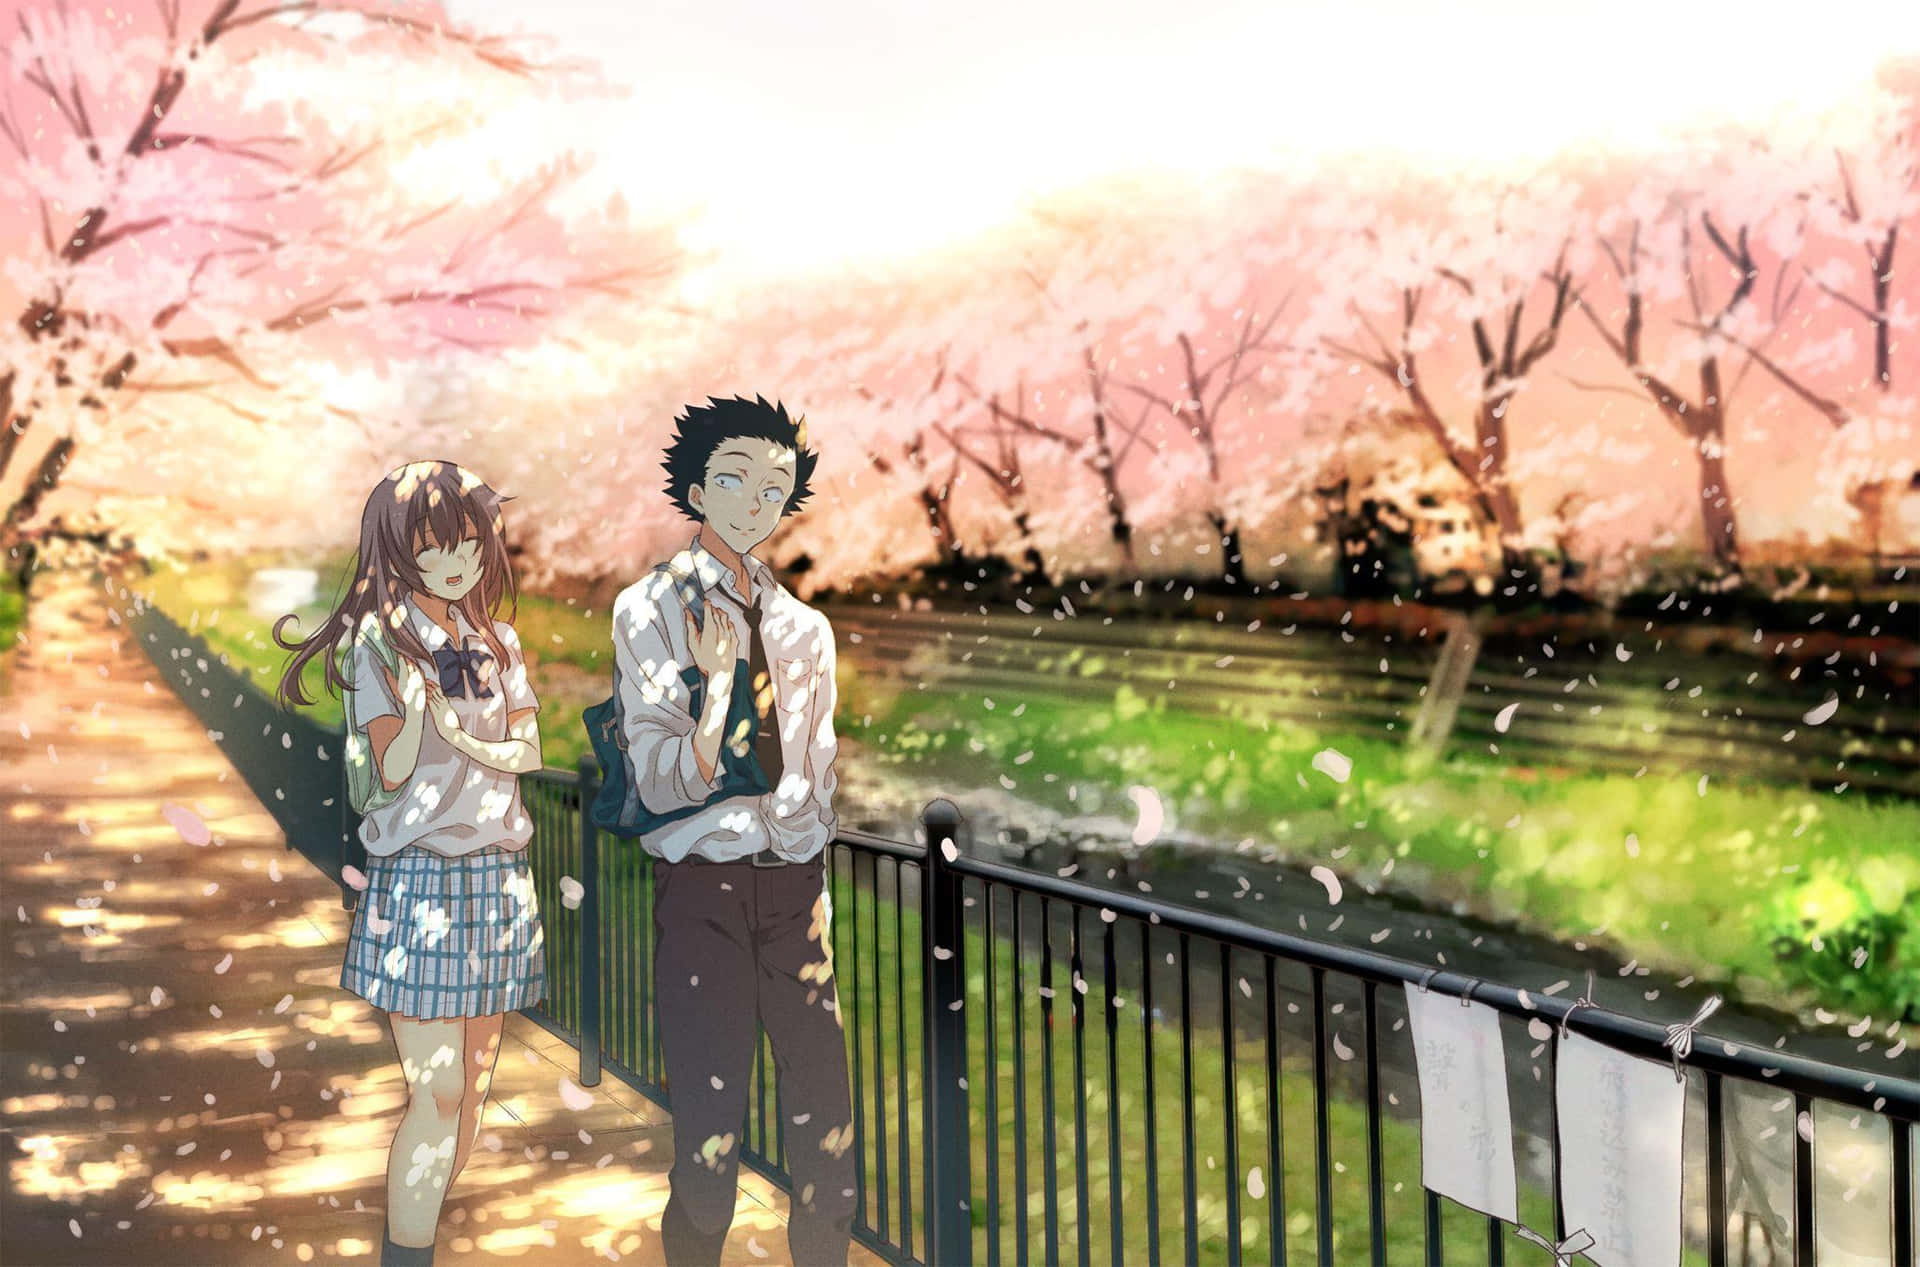 A Silent Voice: An anime about the power of communication and understanding.